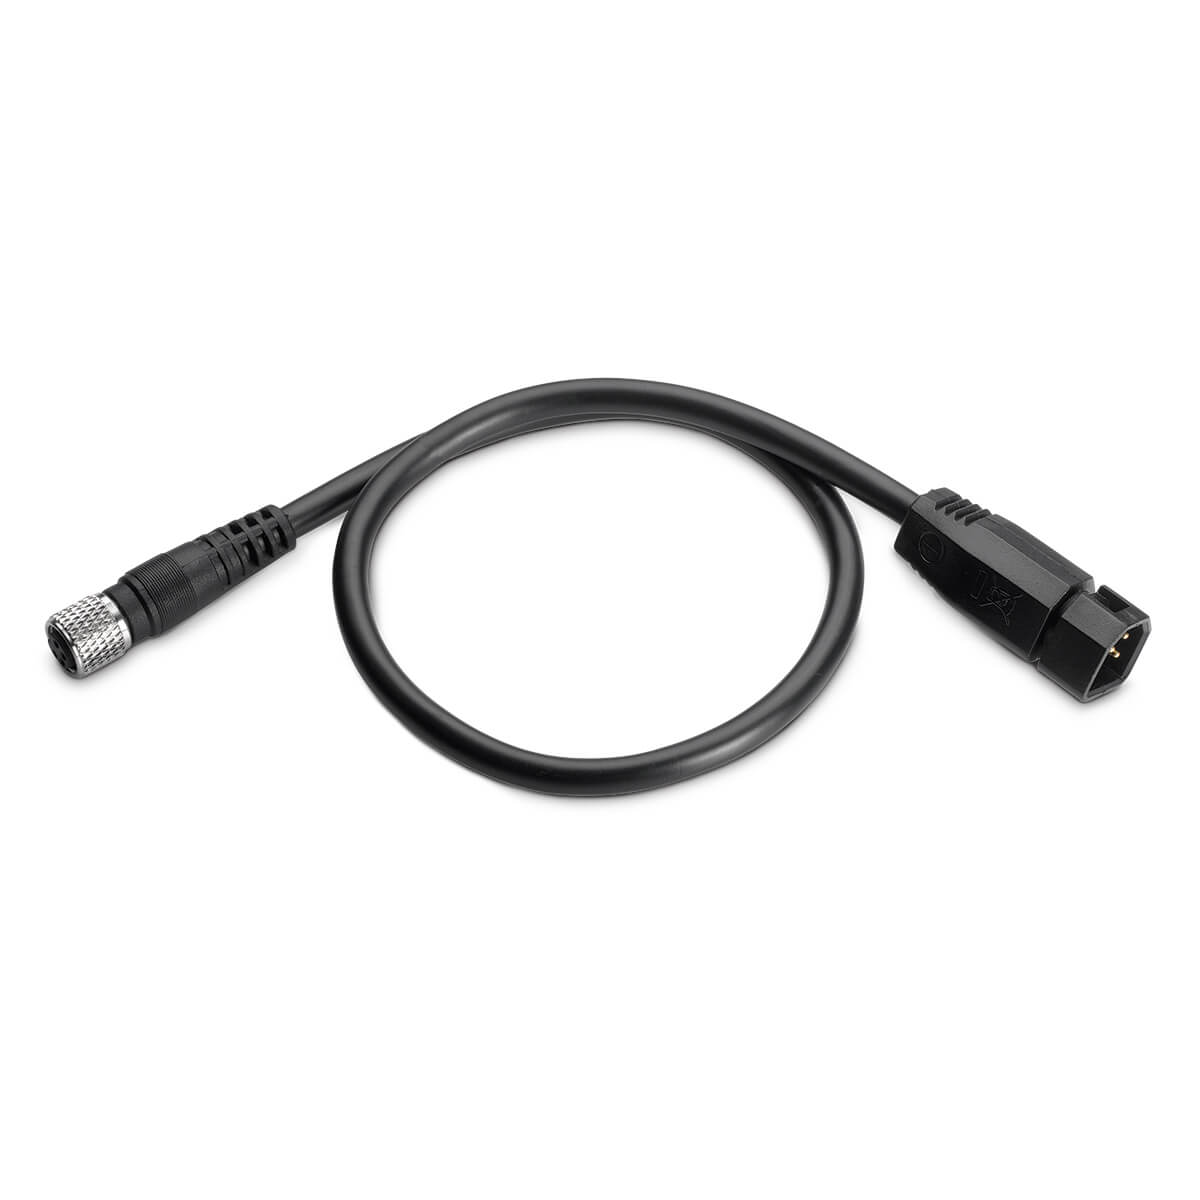  1852076 9-Pin Adapter Cable Replace MKR-US2-16 for